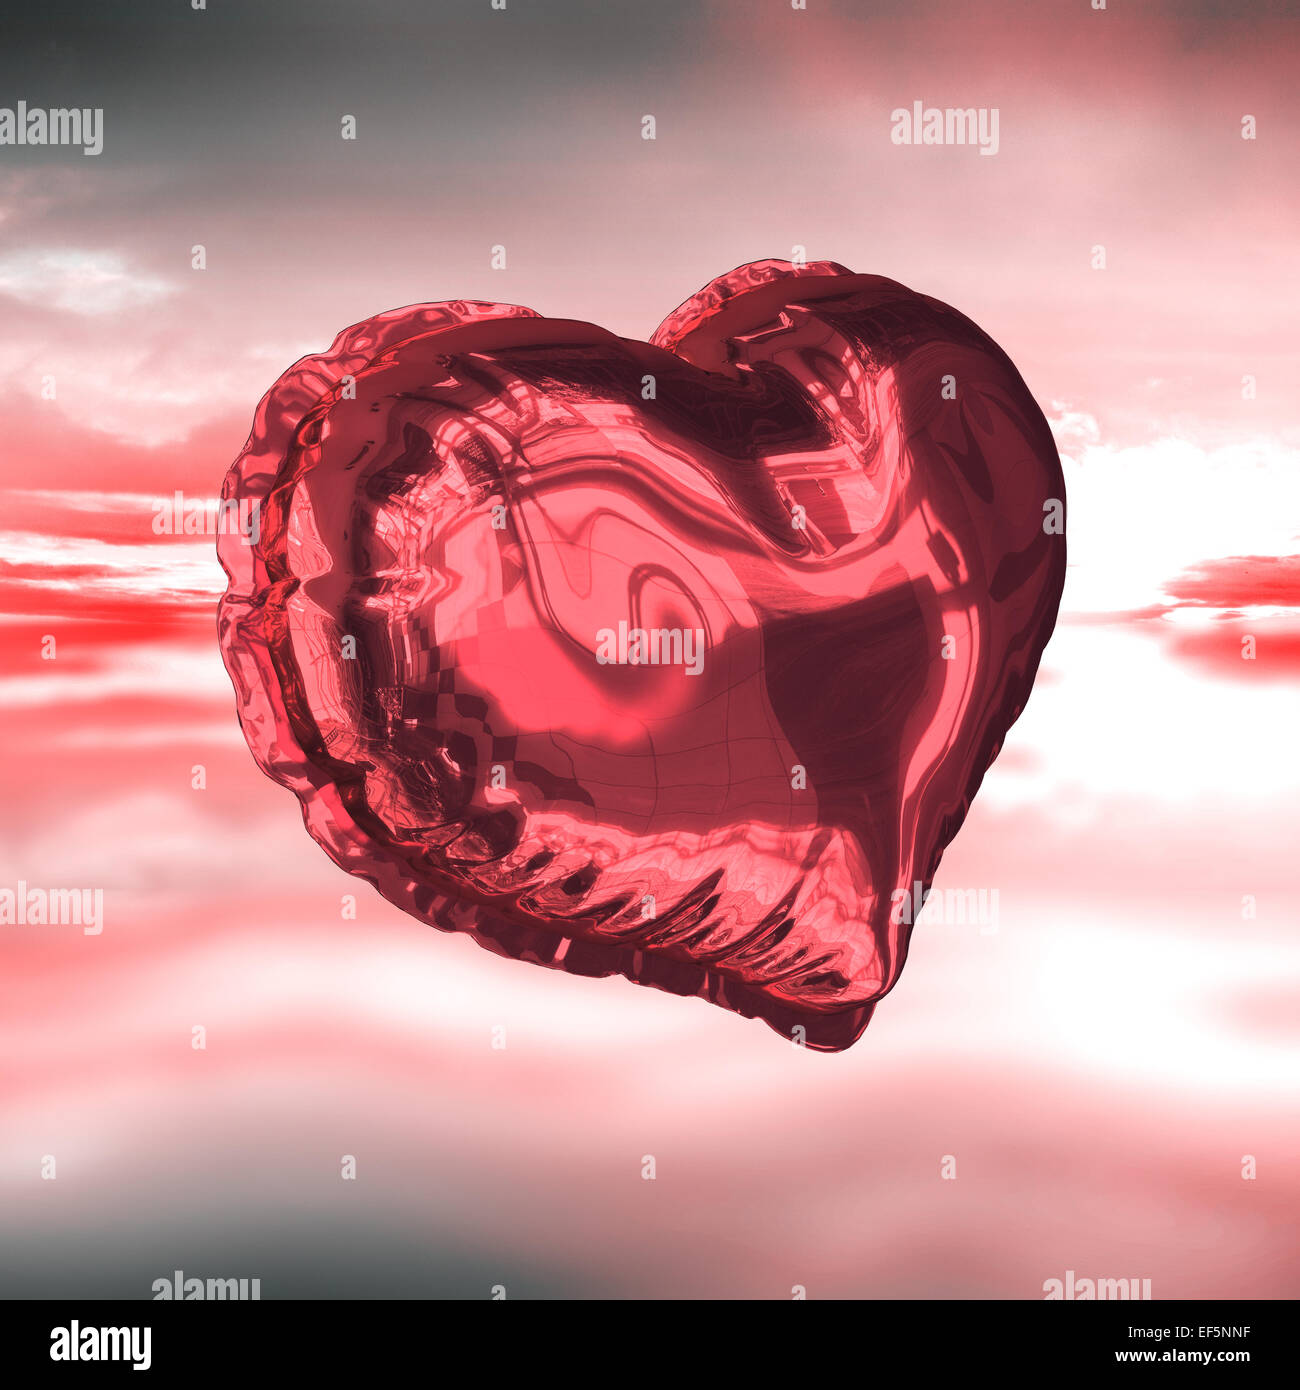 Composite image of red heart balloon Stock Photo